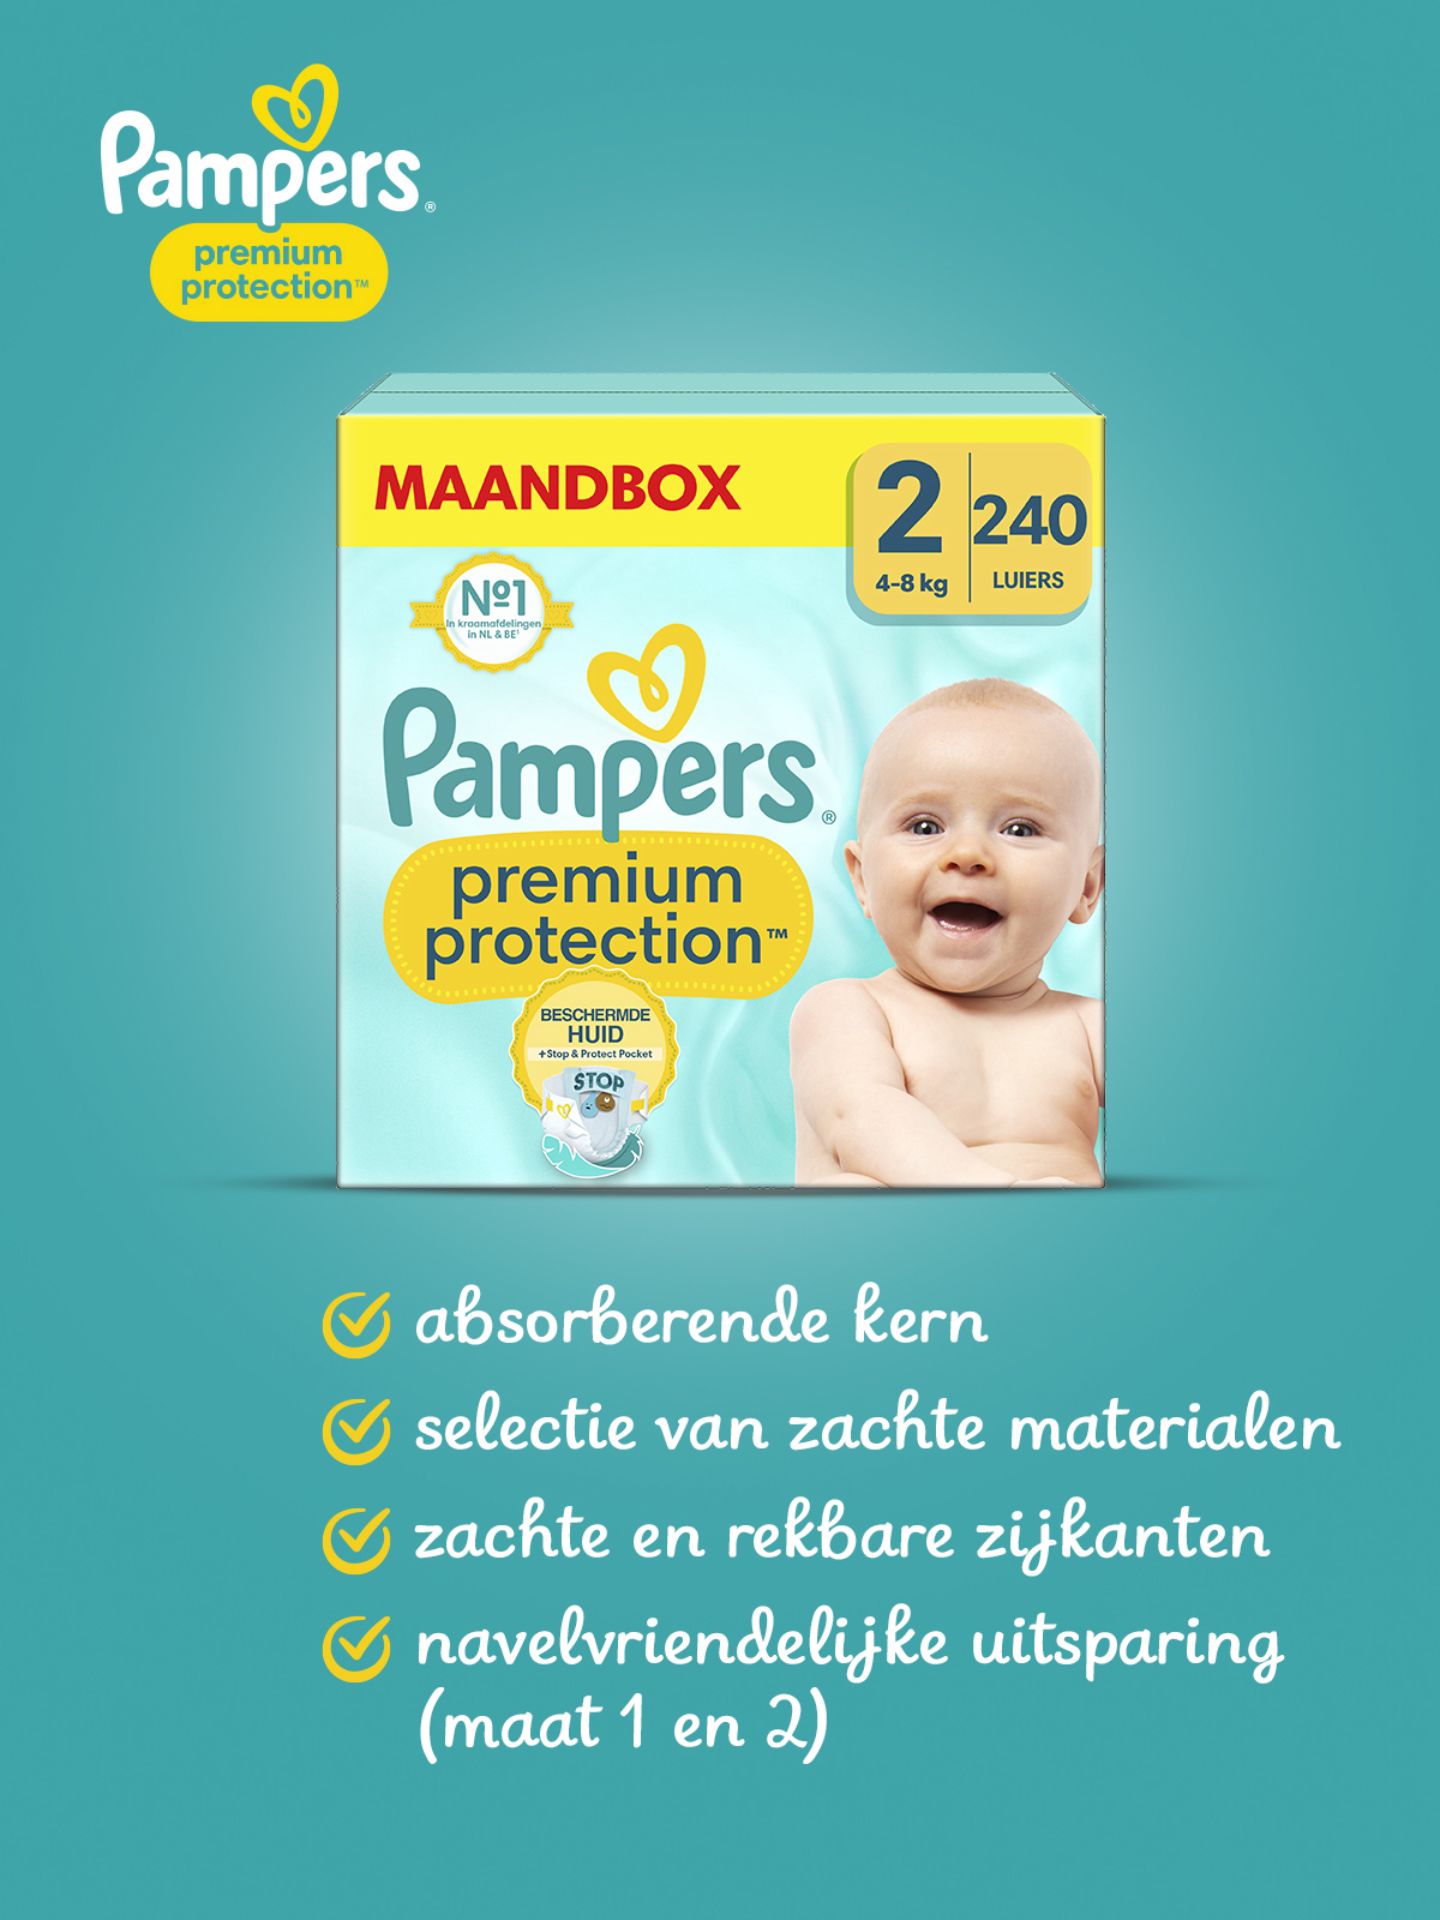 3x_Pampers_online_banners_1200x1600px_PREMIUM_PROTECTION.JPG